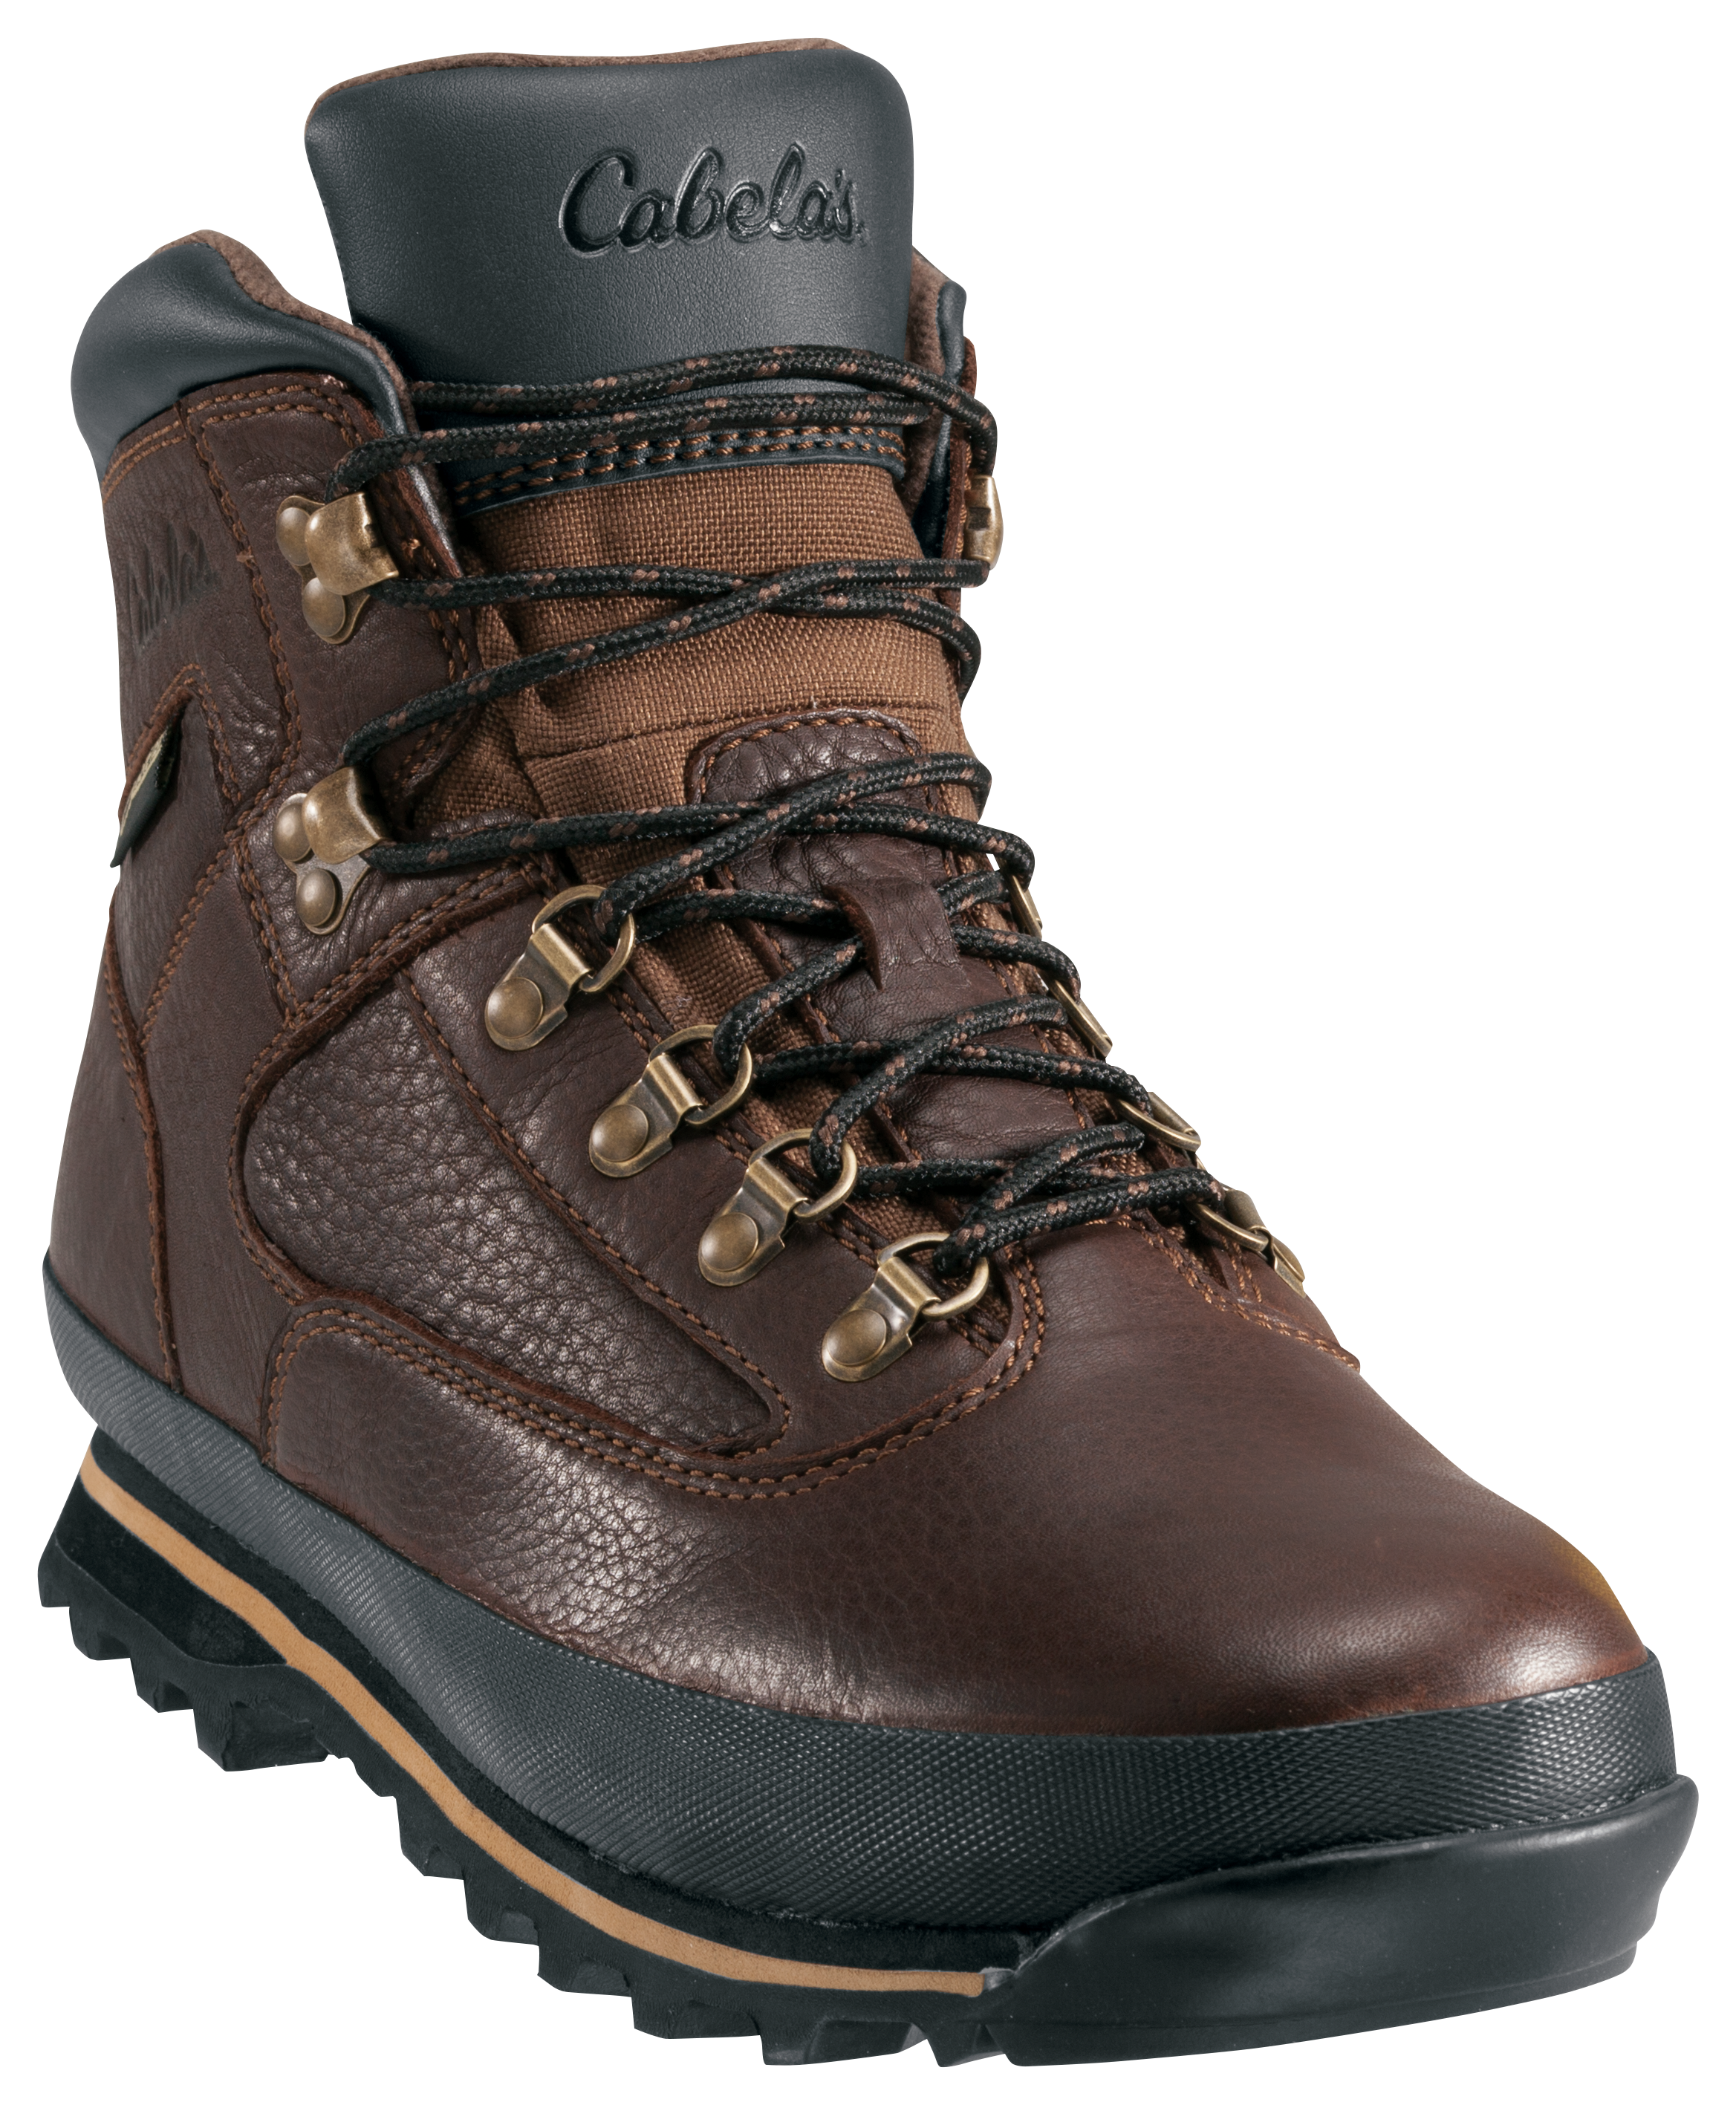 Cabela's Rimrock Mid GORE-TEX Hiking Boots for Men - Brown - 12W